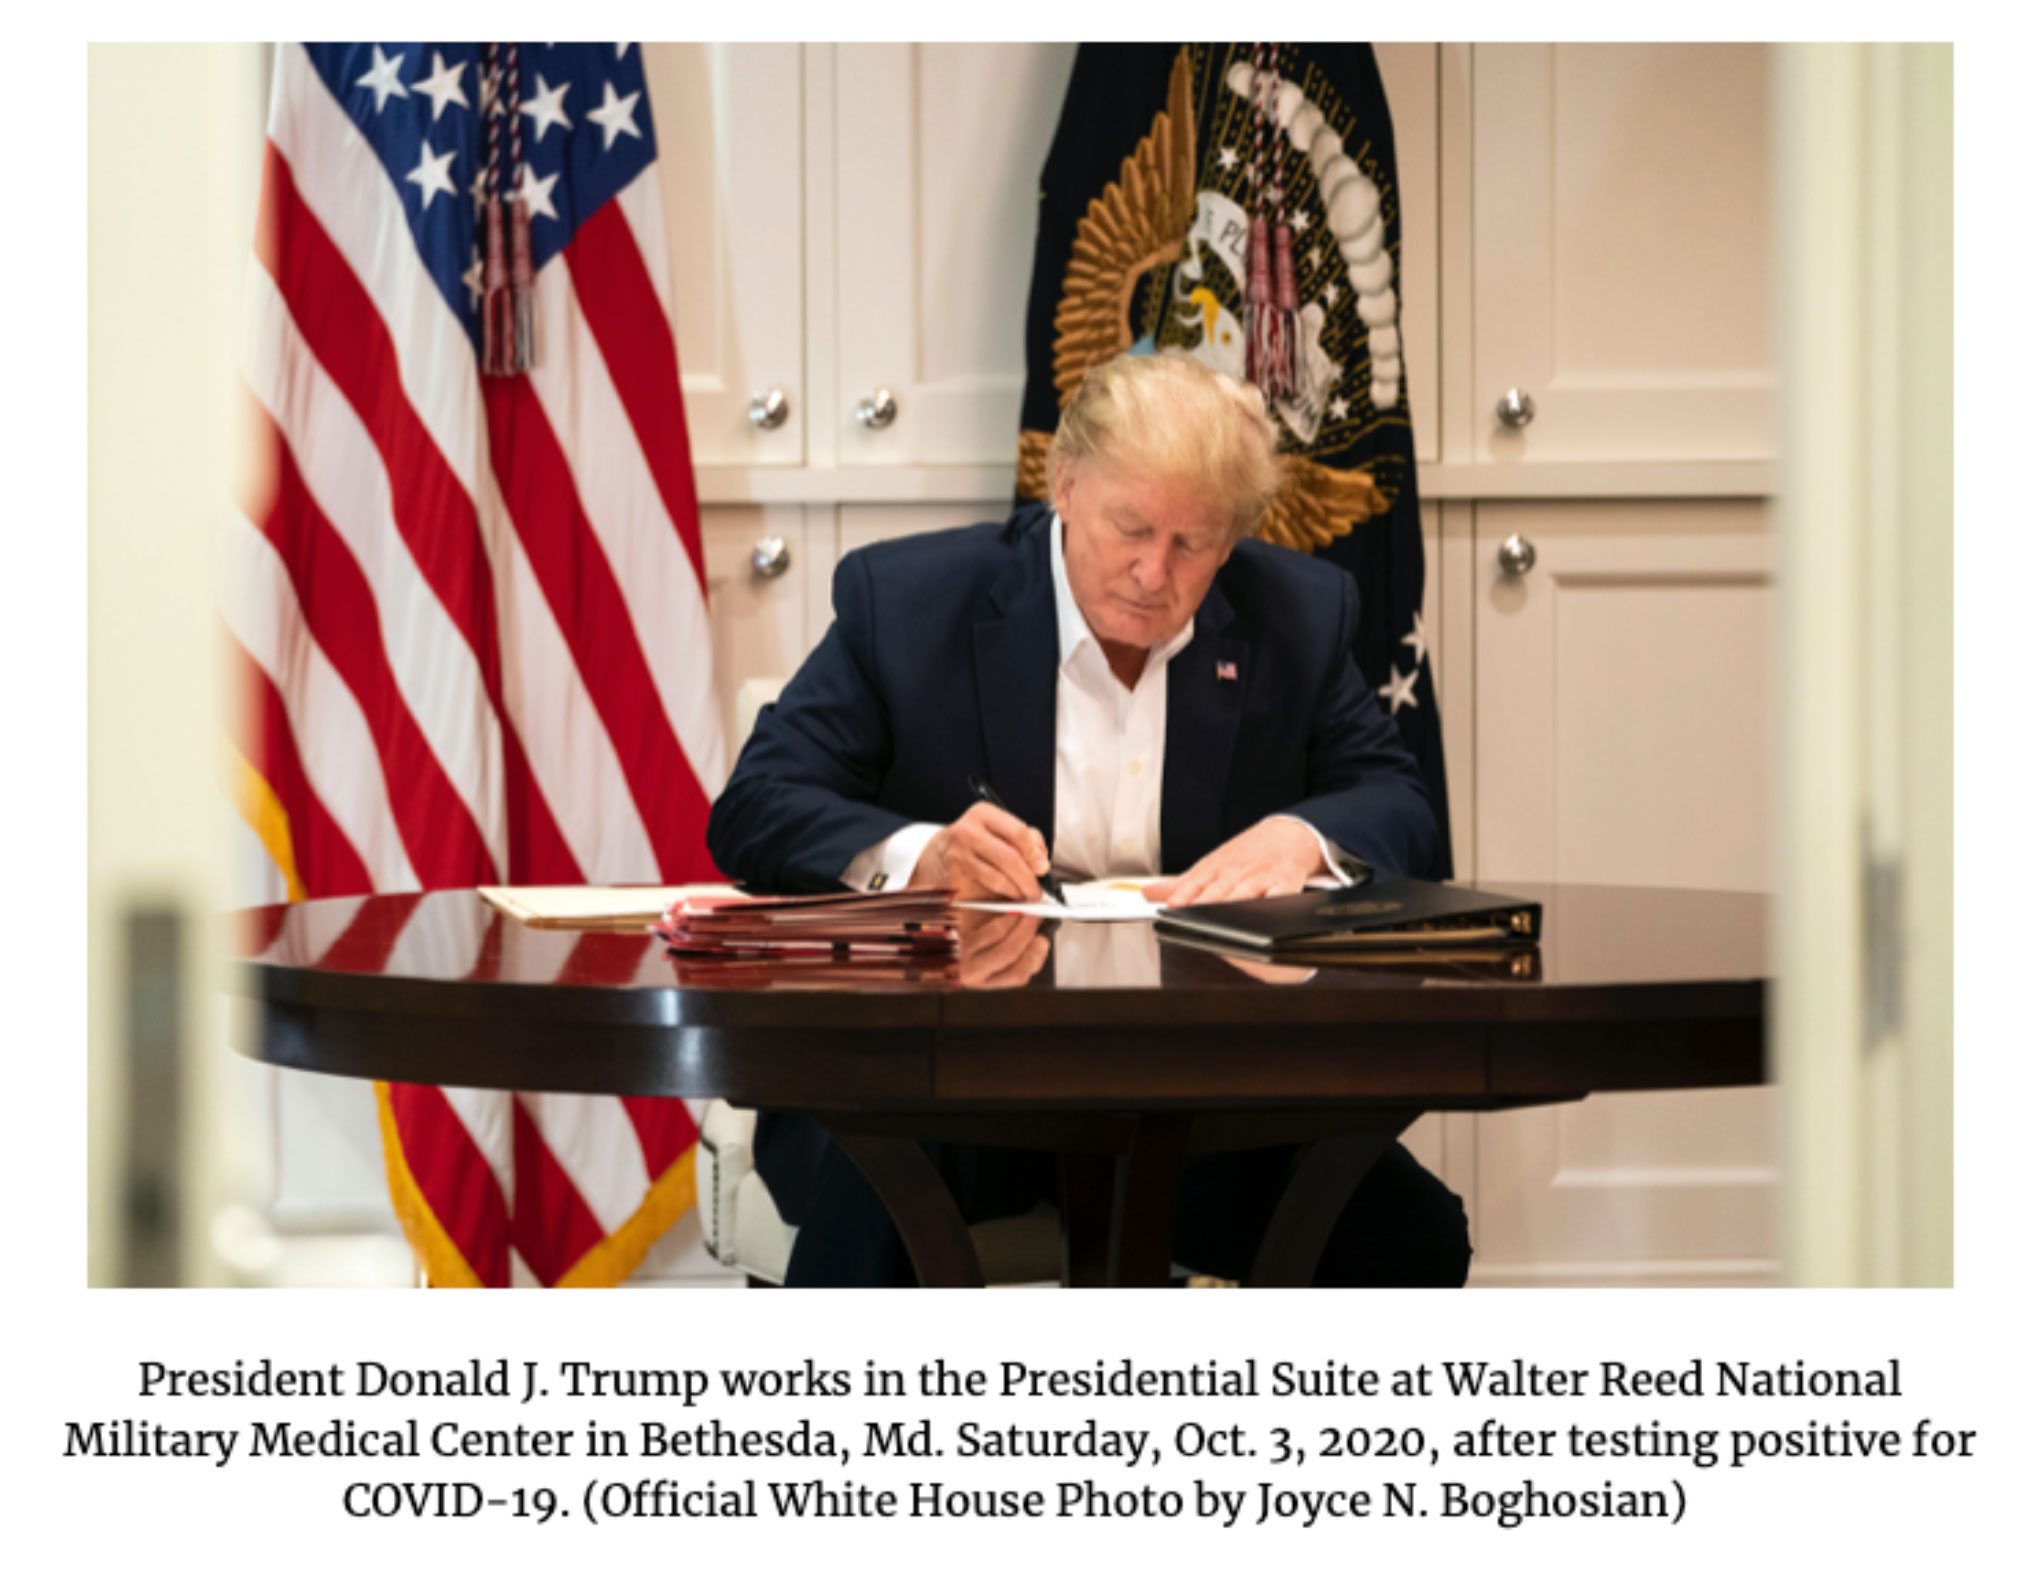 Donald Trump - Pa President Donald J. Trump works in the Presidential Suite at Walter Reed National Military Medical Center in Bethesda, Md. Saturday, Oct. 3, 2020, after testing positive for Covid19. Official White House Photo by Joyce N. Boghosian